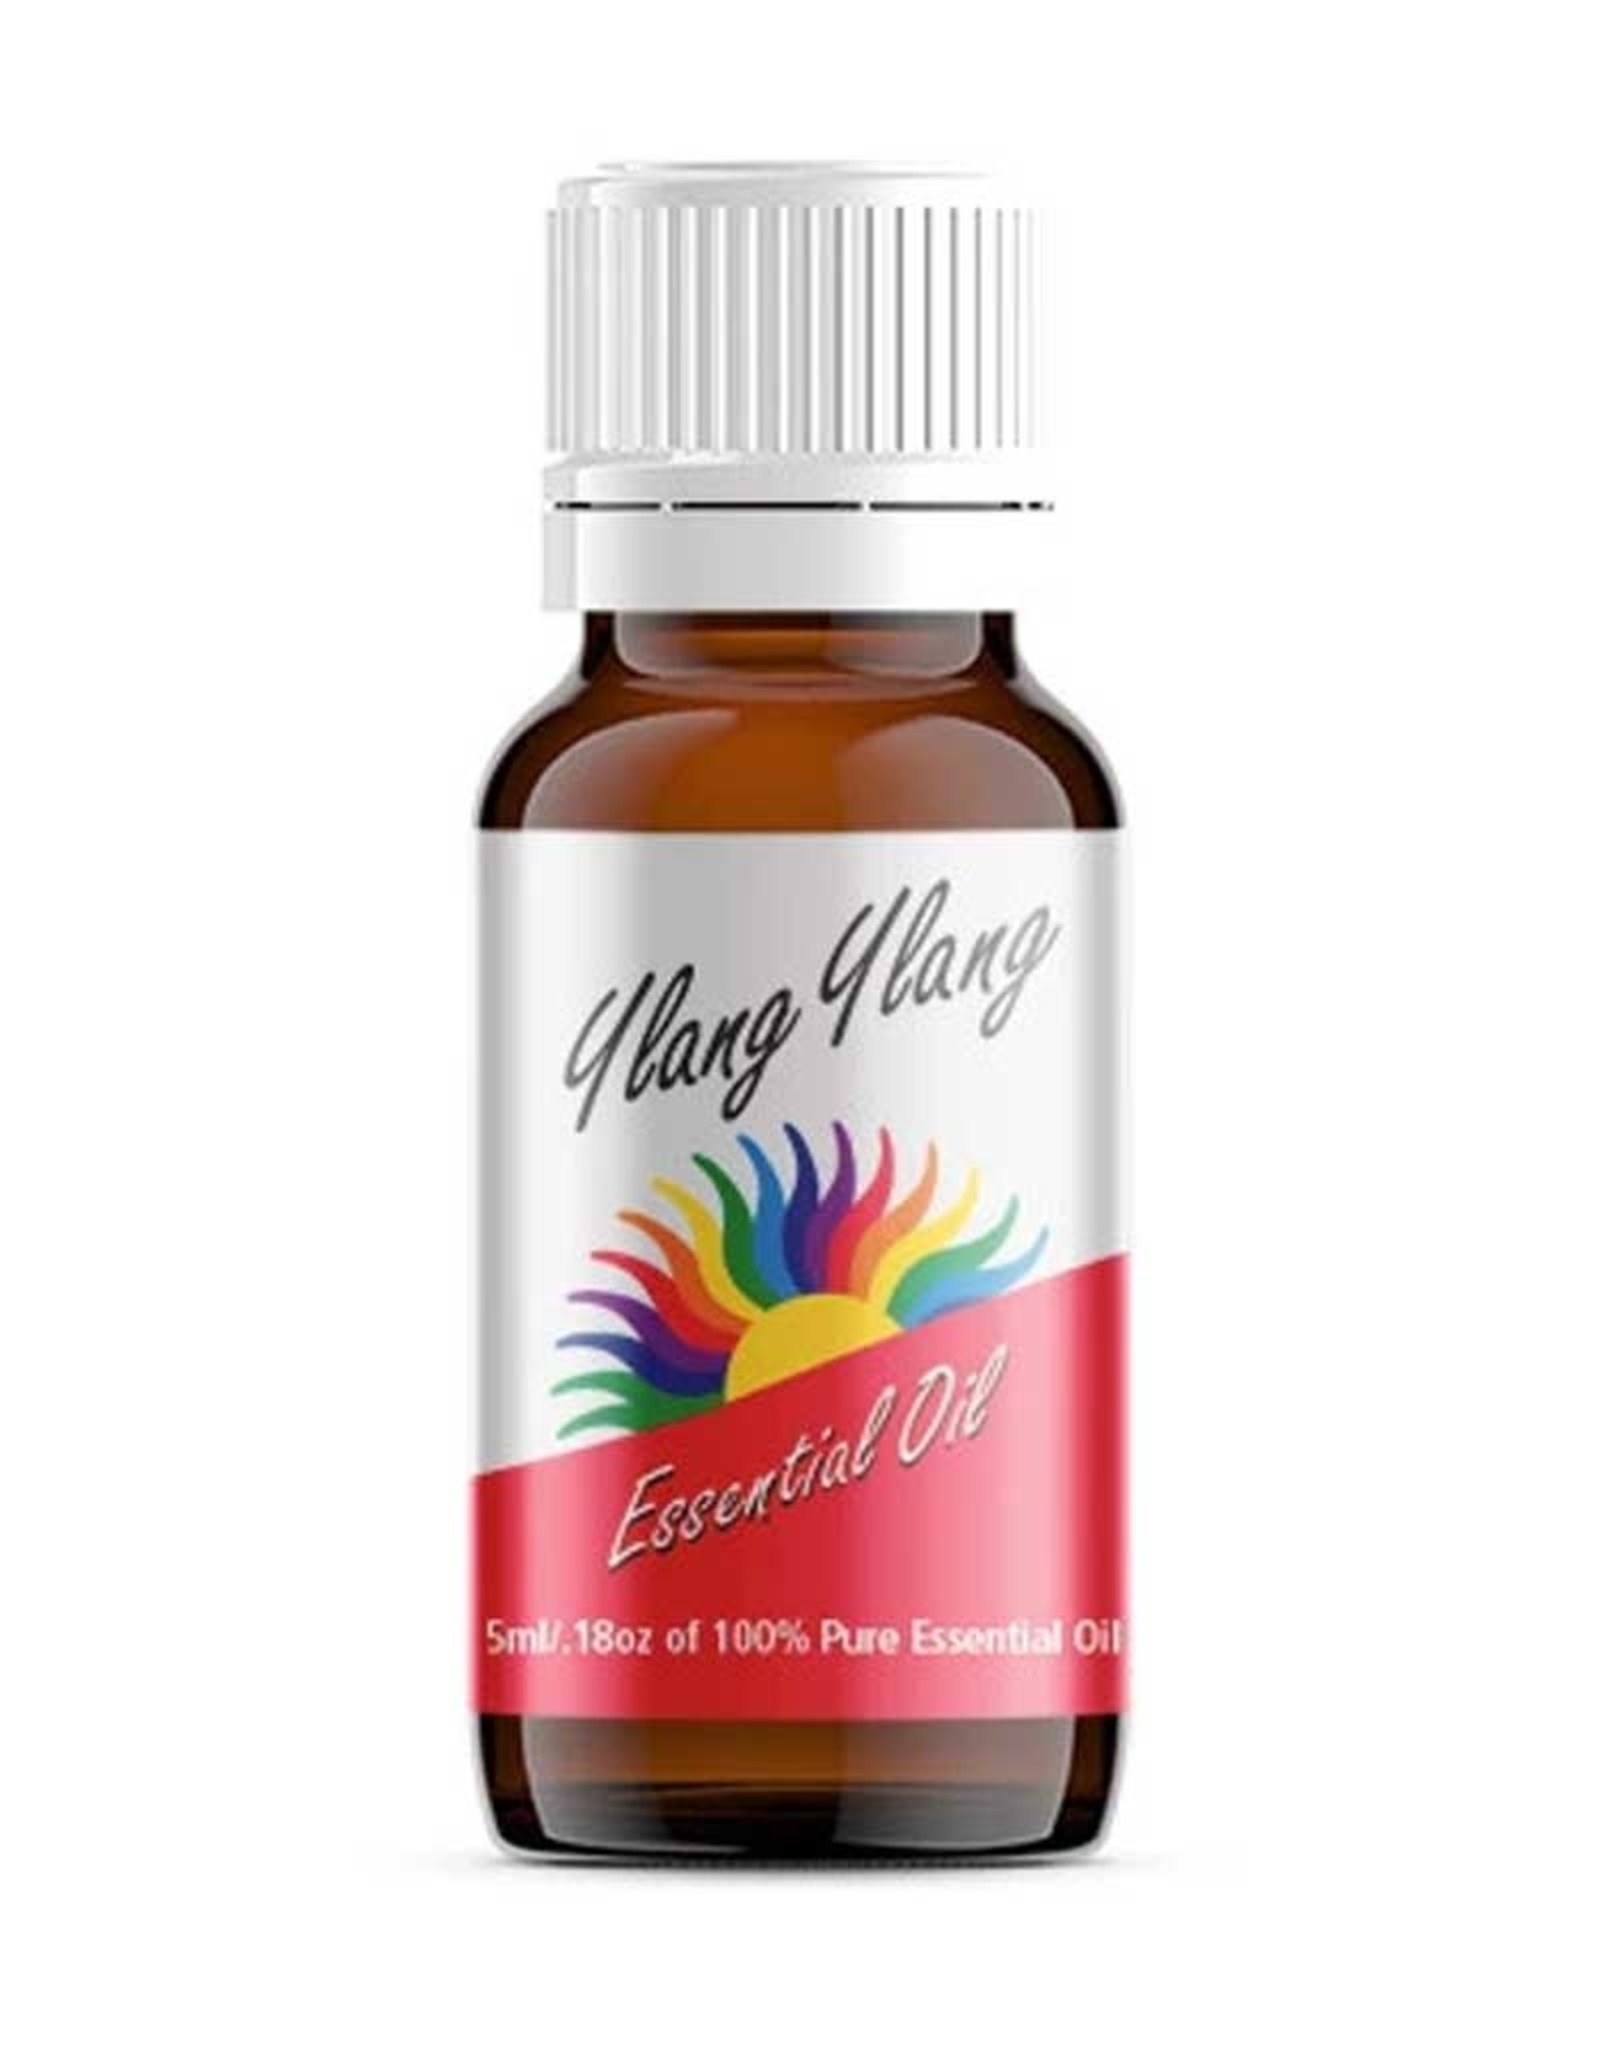 Colour Energy Ylang Ylang Essential Oil 10ml